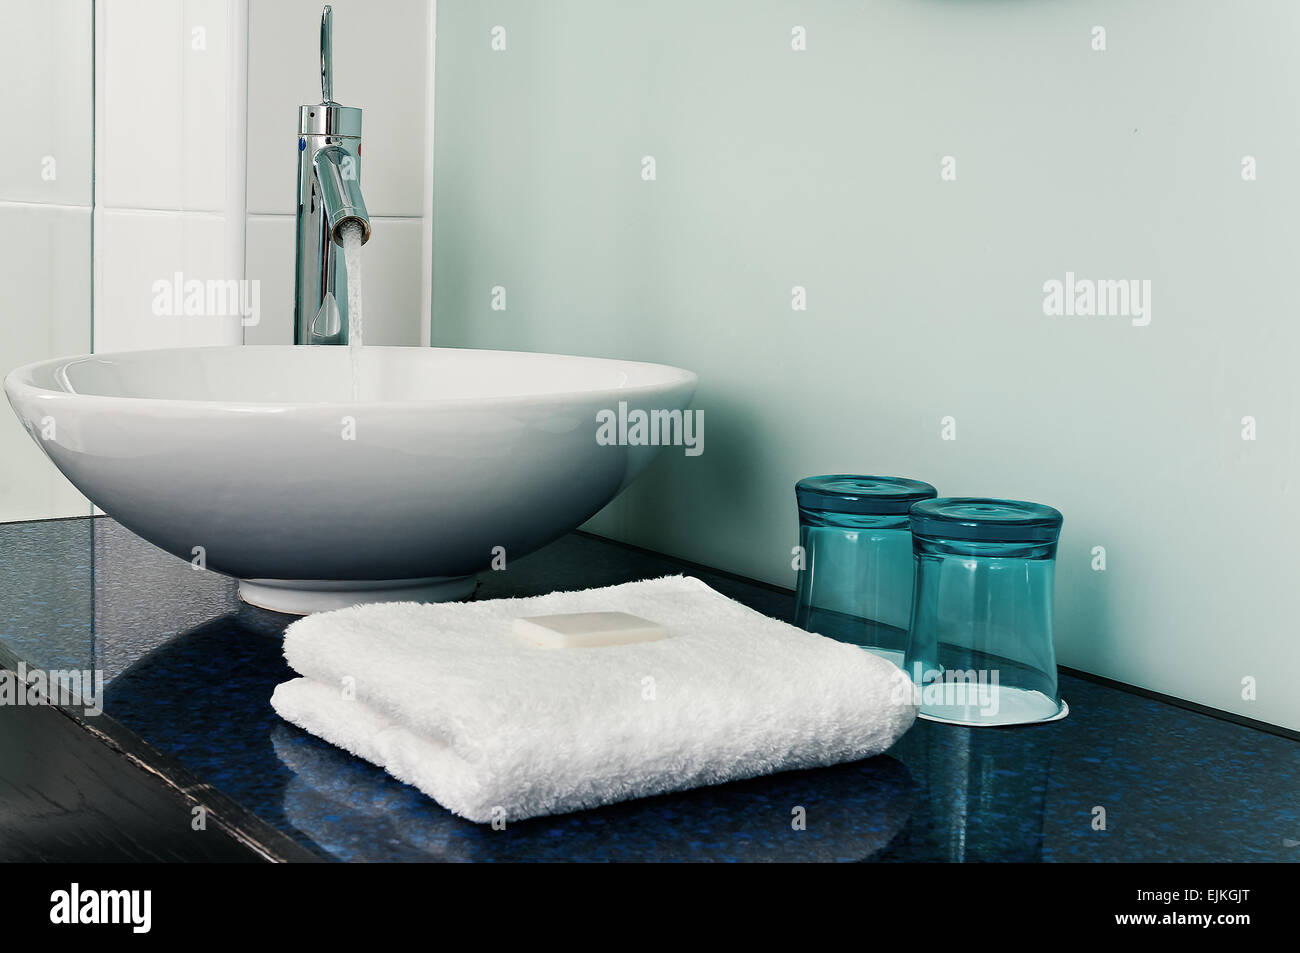 Bathroom sink counter towels water glass blue Stock Photo